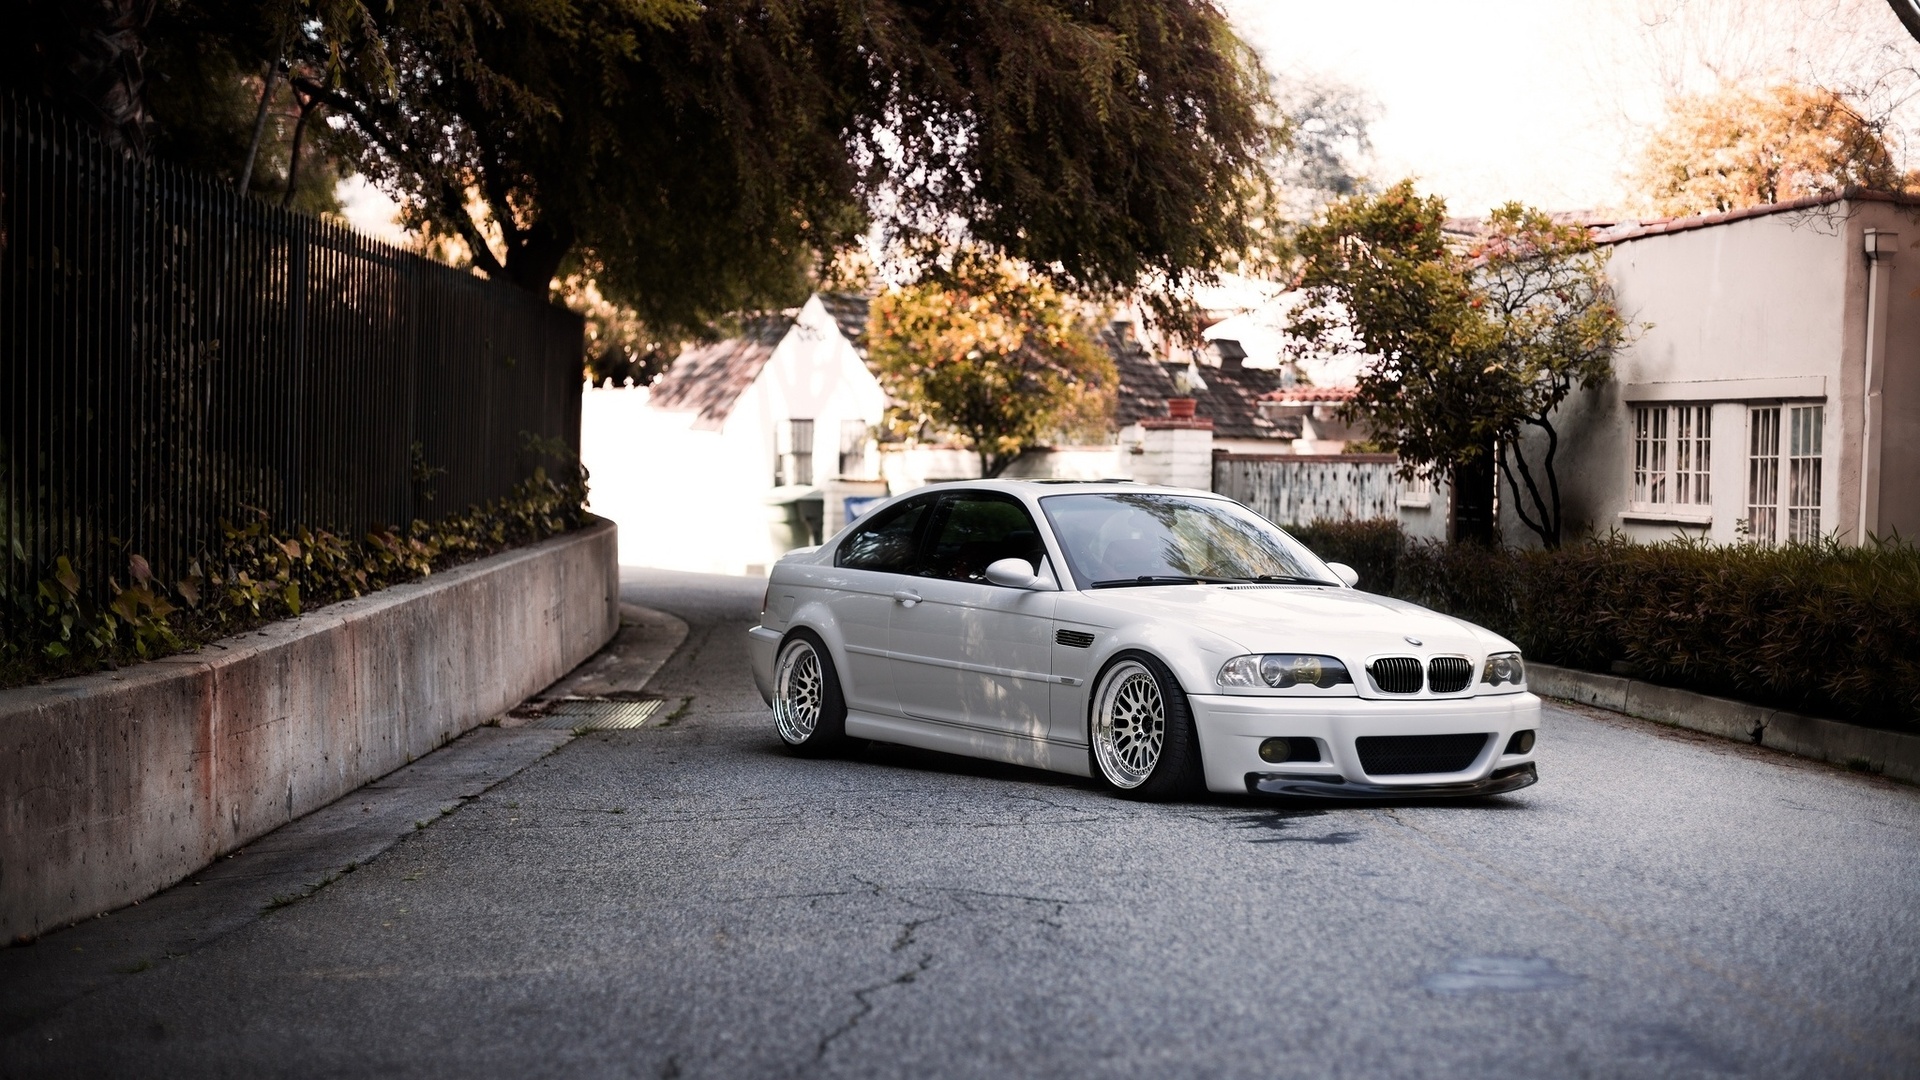 vehicles, Cars, Bmw, Tuning, Stance, Roads, Architecture, Buildings, Houses, Homes Wallpaper